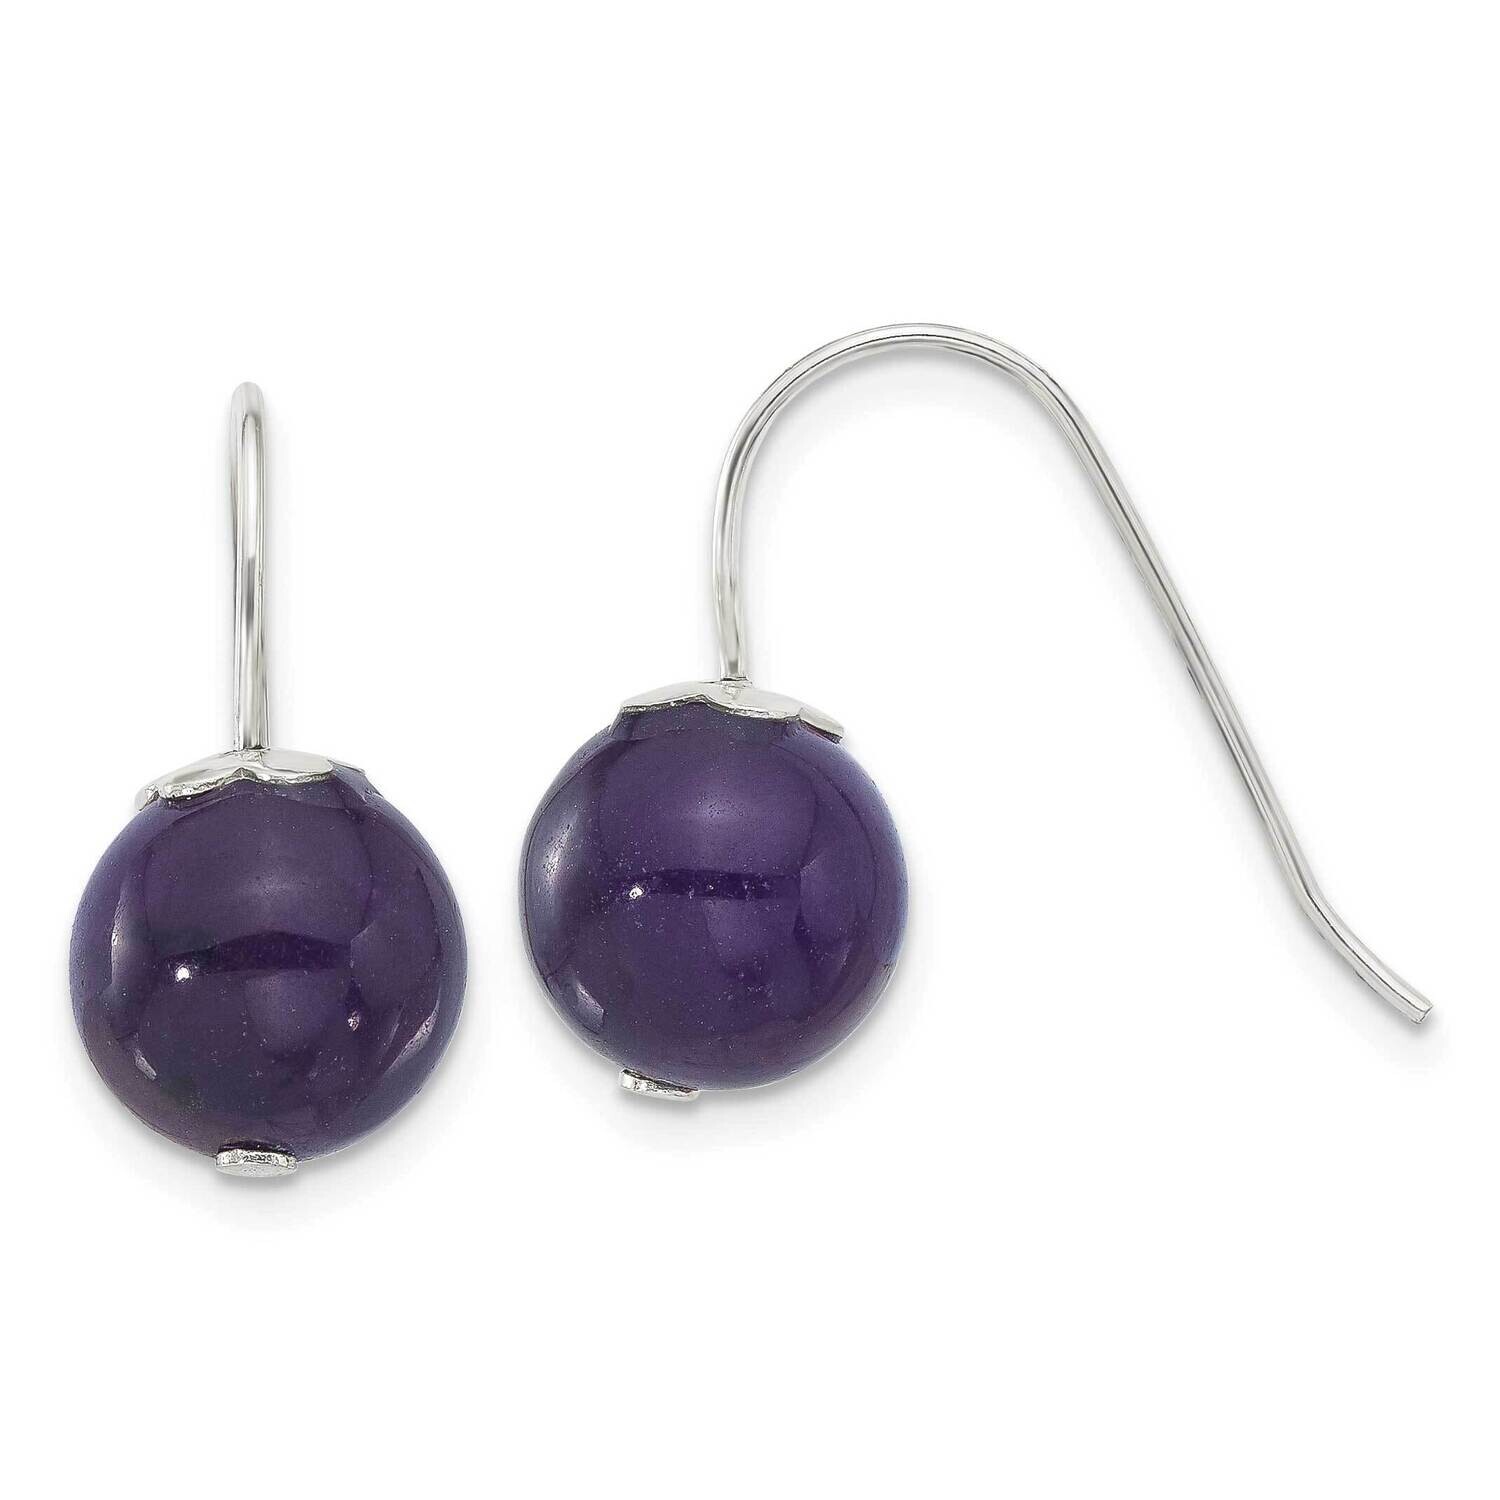 10mm Round Amethyst Dangle Earrings Sterling Silver Polished QE17376